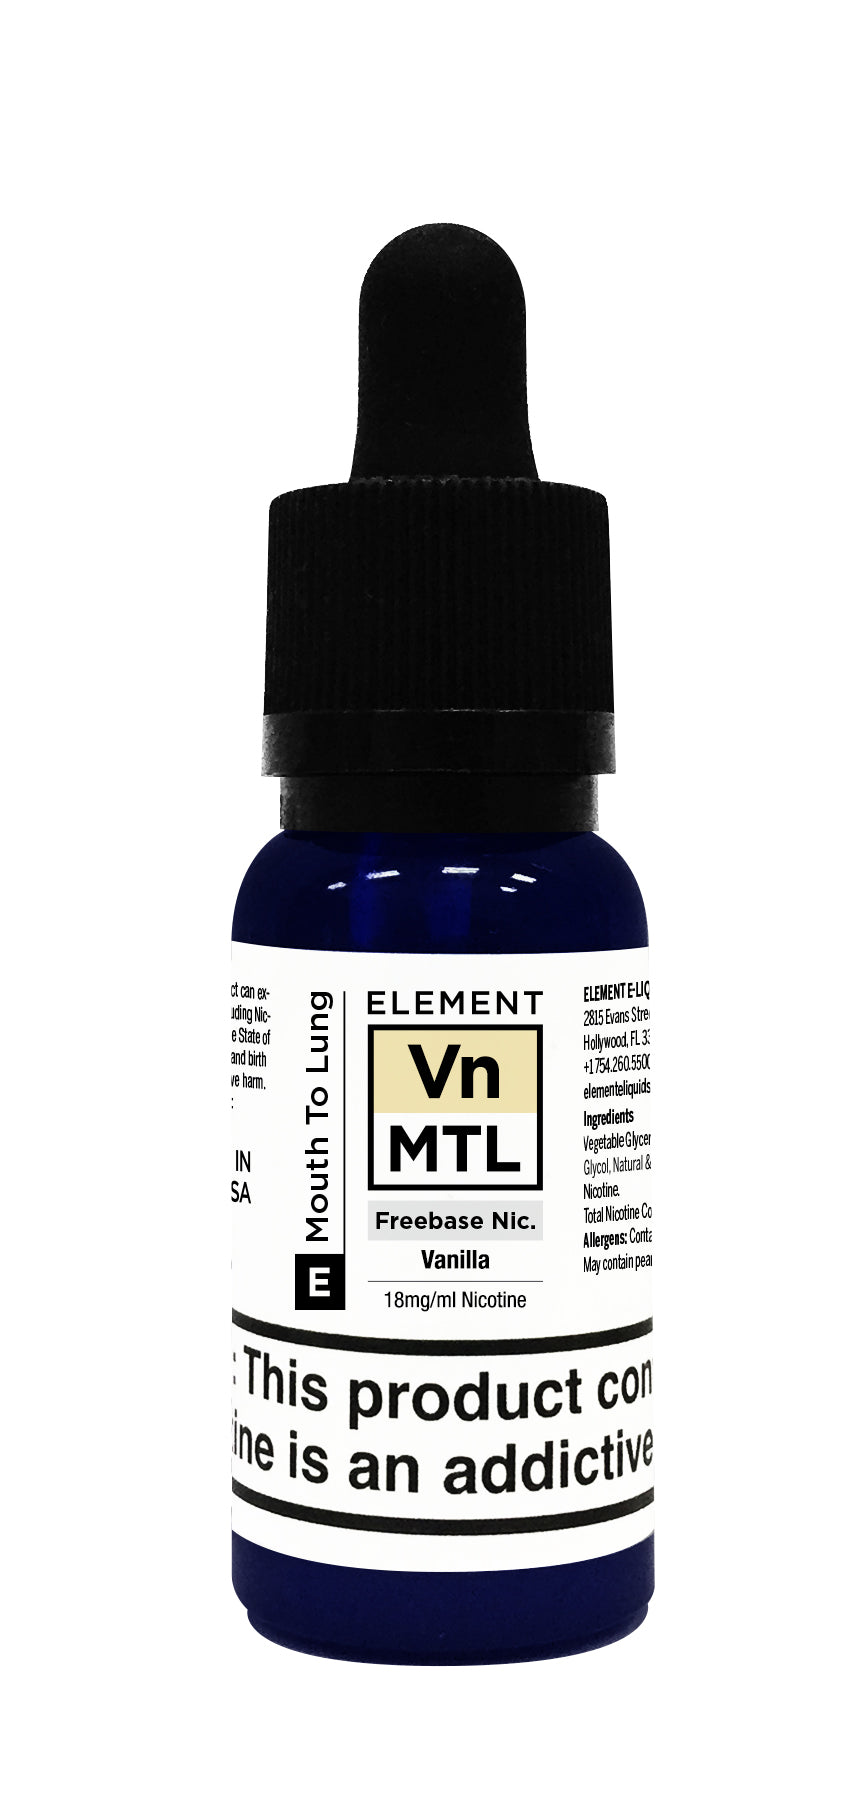 element e-liquid"s mtl02brings out the best in a02mouth02